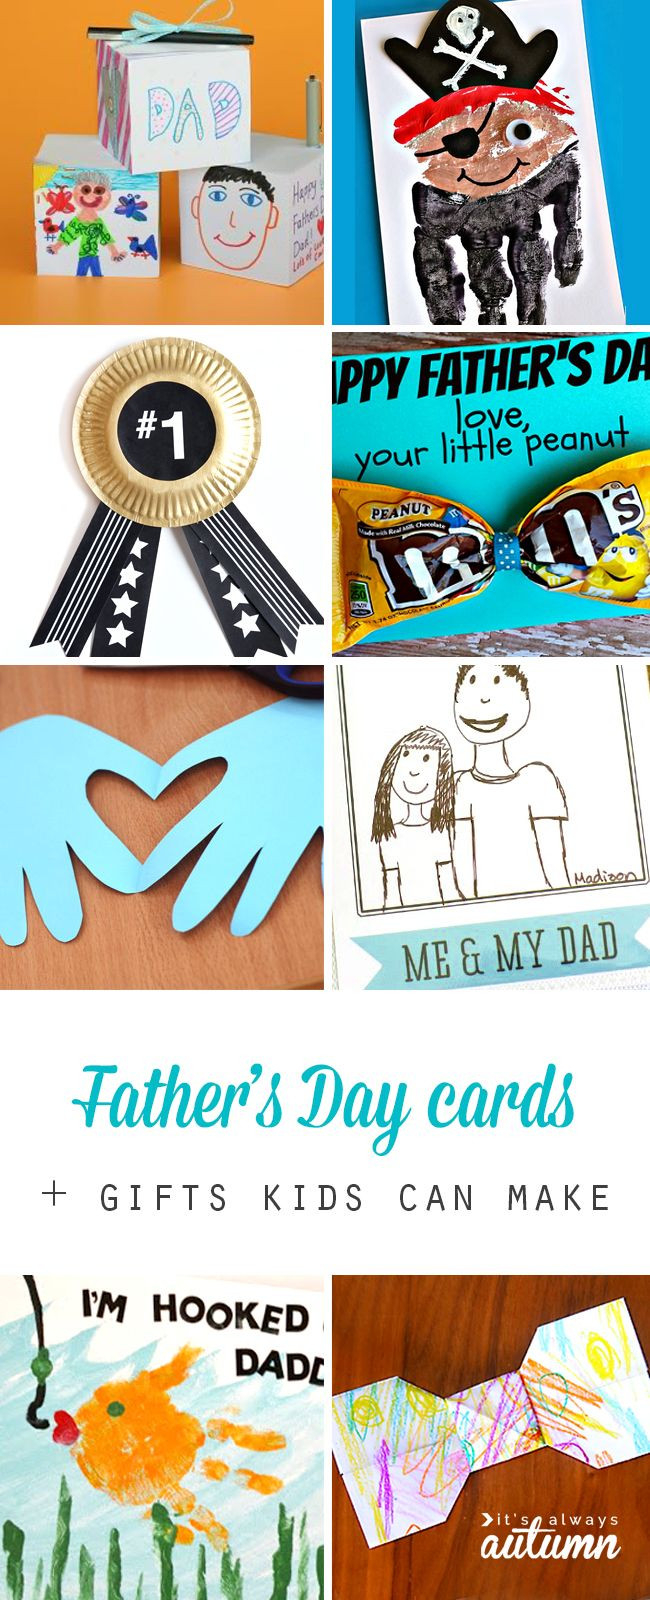 Gifts Kids Can Make For Dad
 20 adorable Father s day card ideas for kids to make